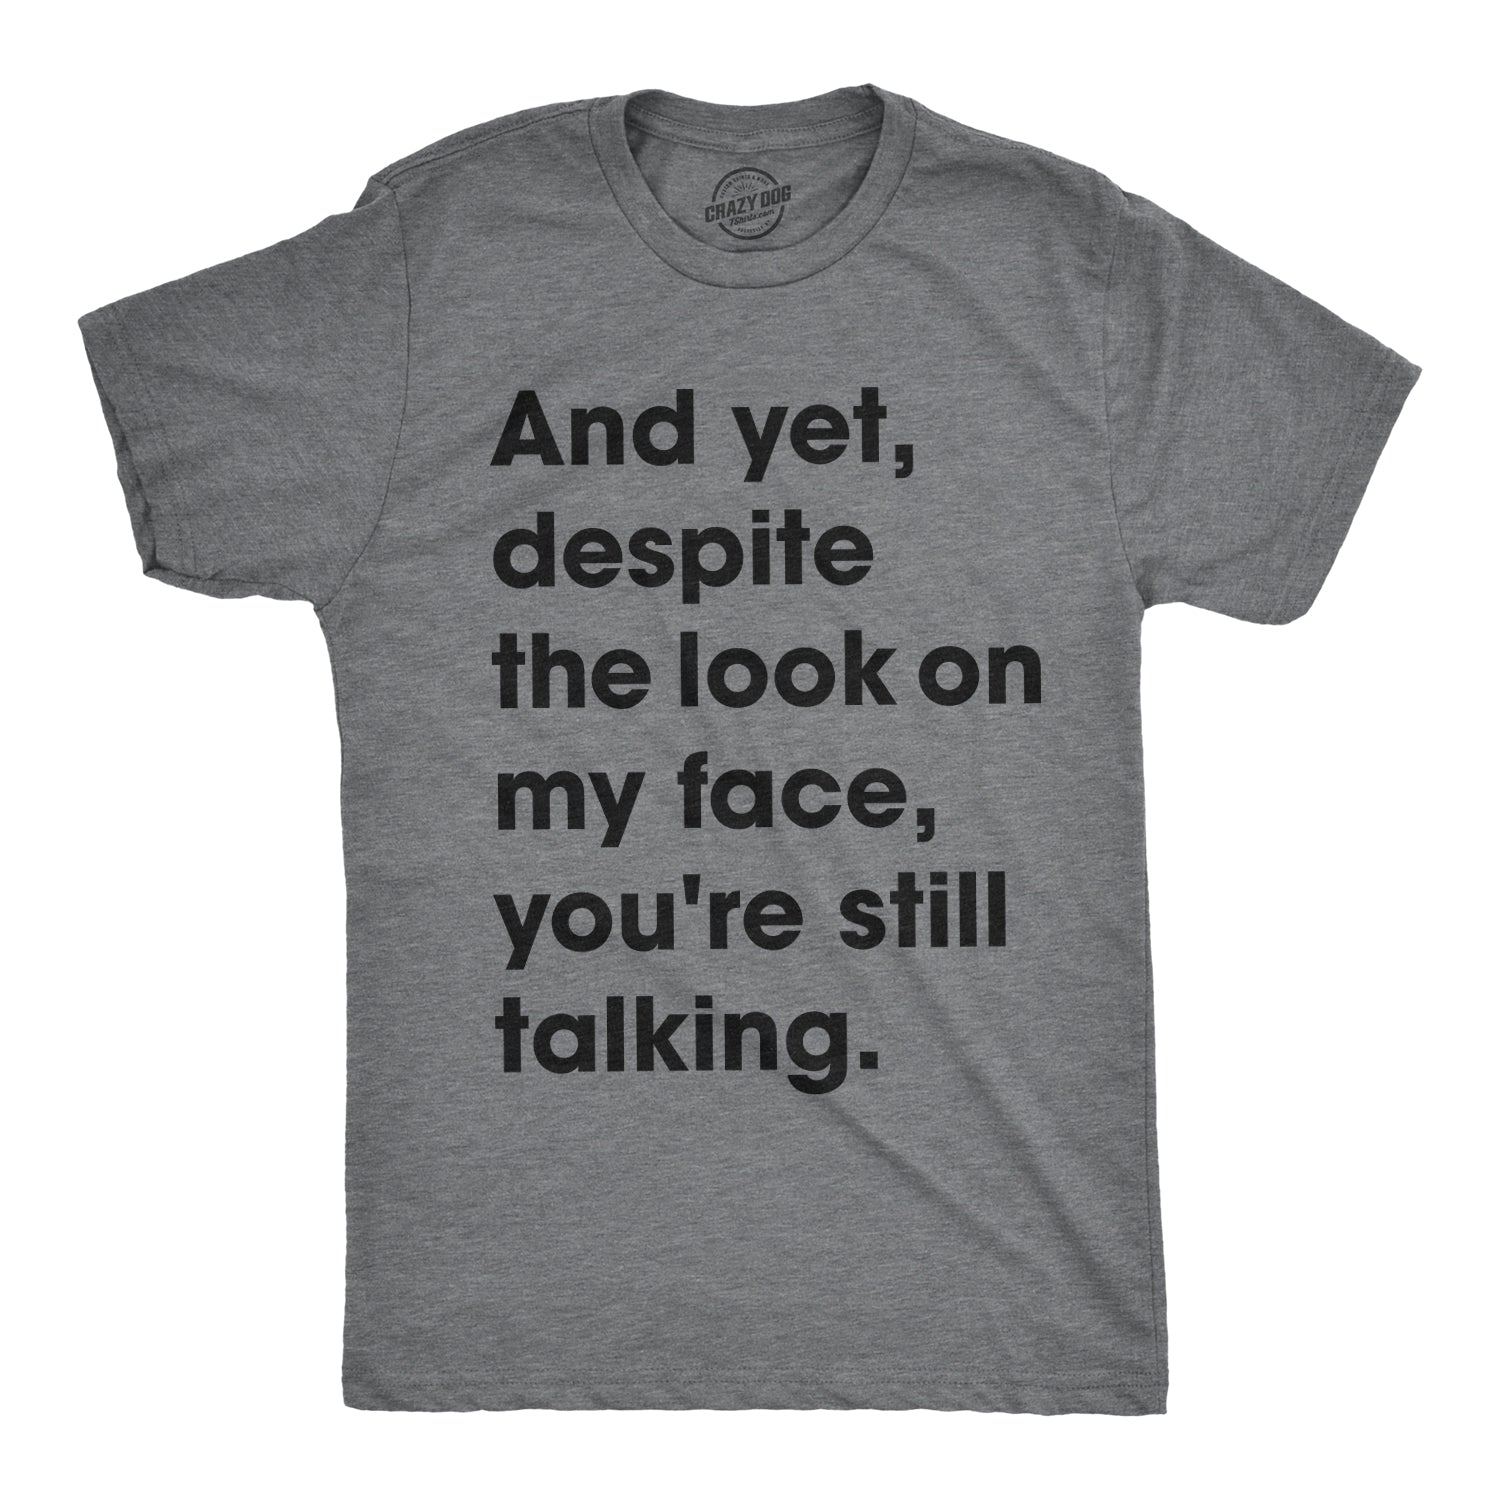 Funny Dark Heather Grey - Still Talking And Yet, Despite The Look On My Face, You're Still Talking Mens T Shirt Nerdy Sarcastic Tee